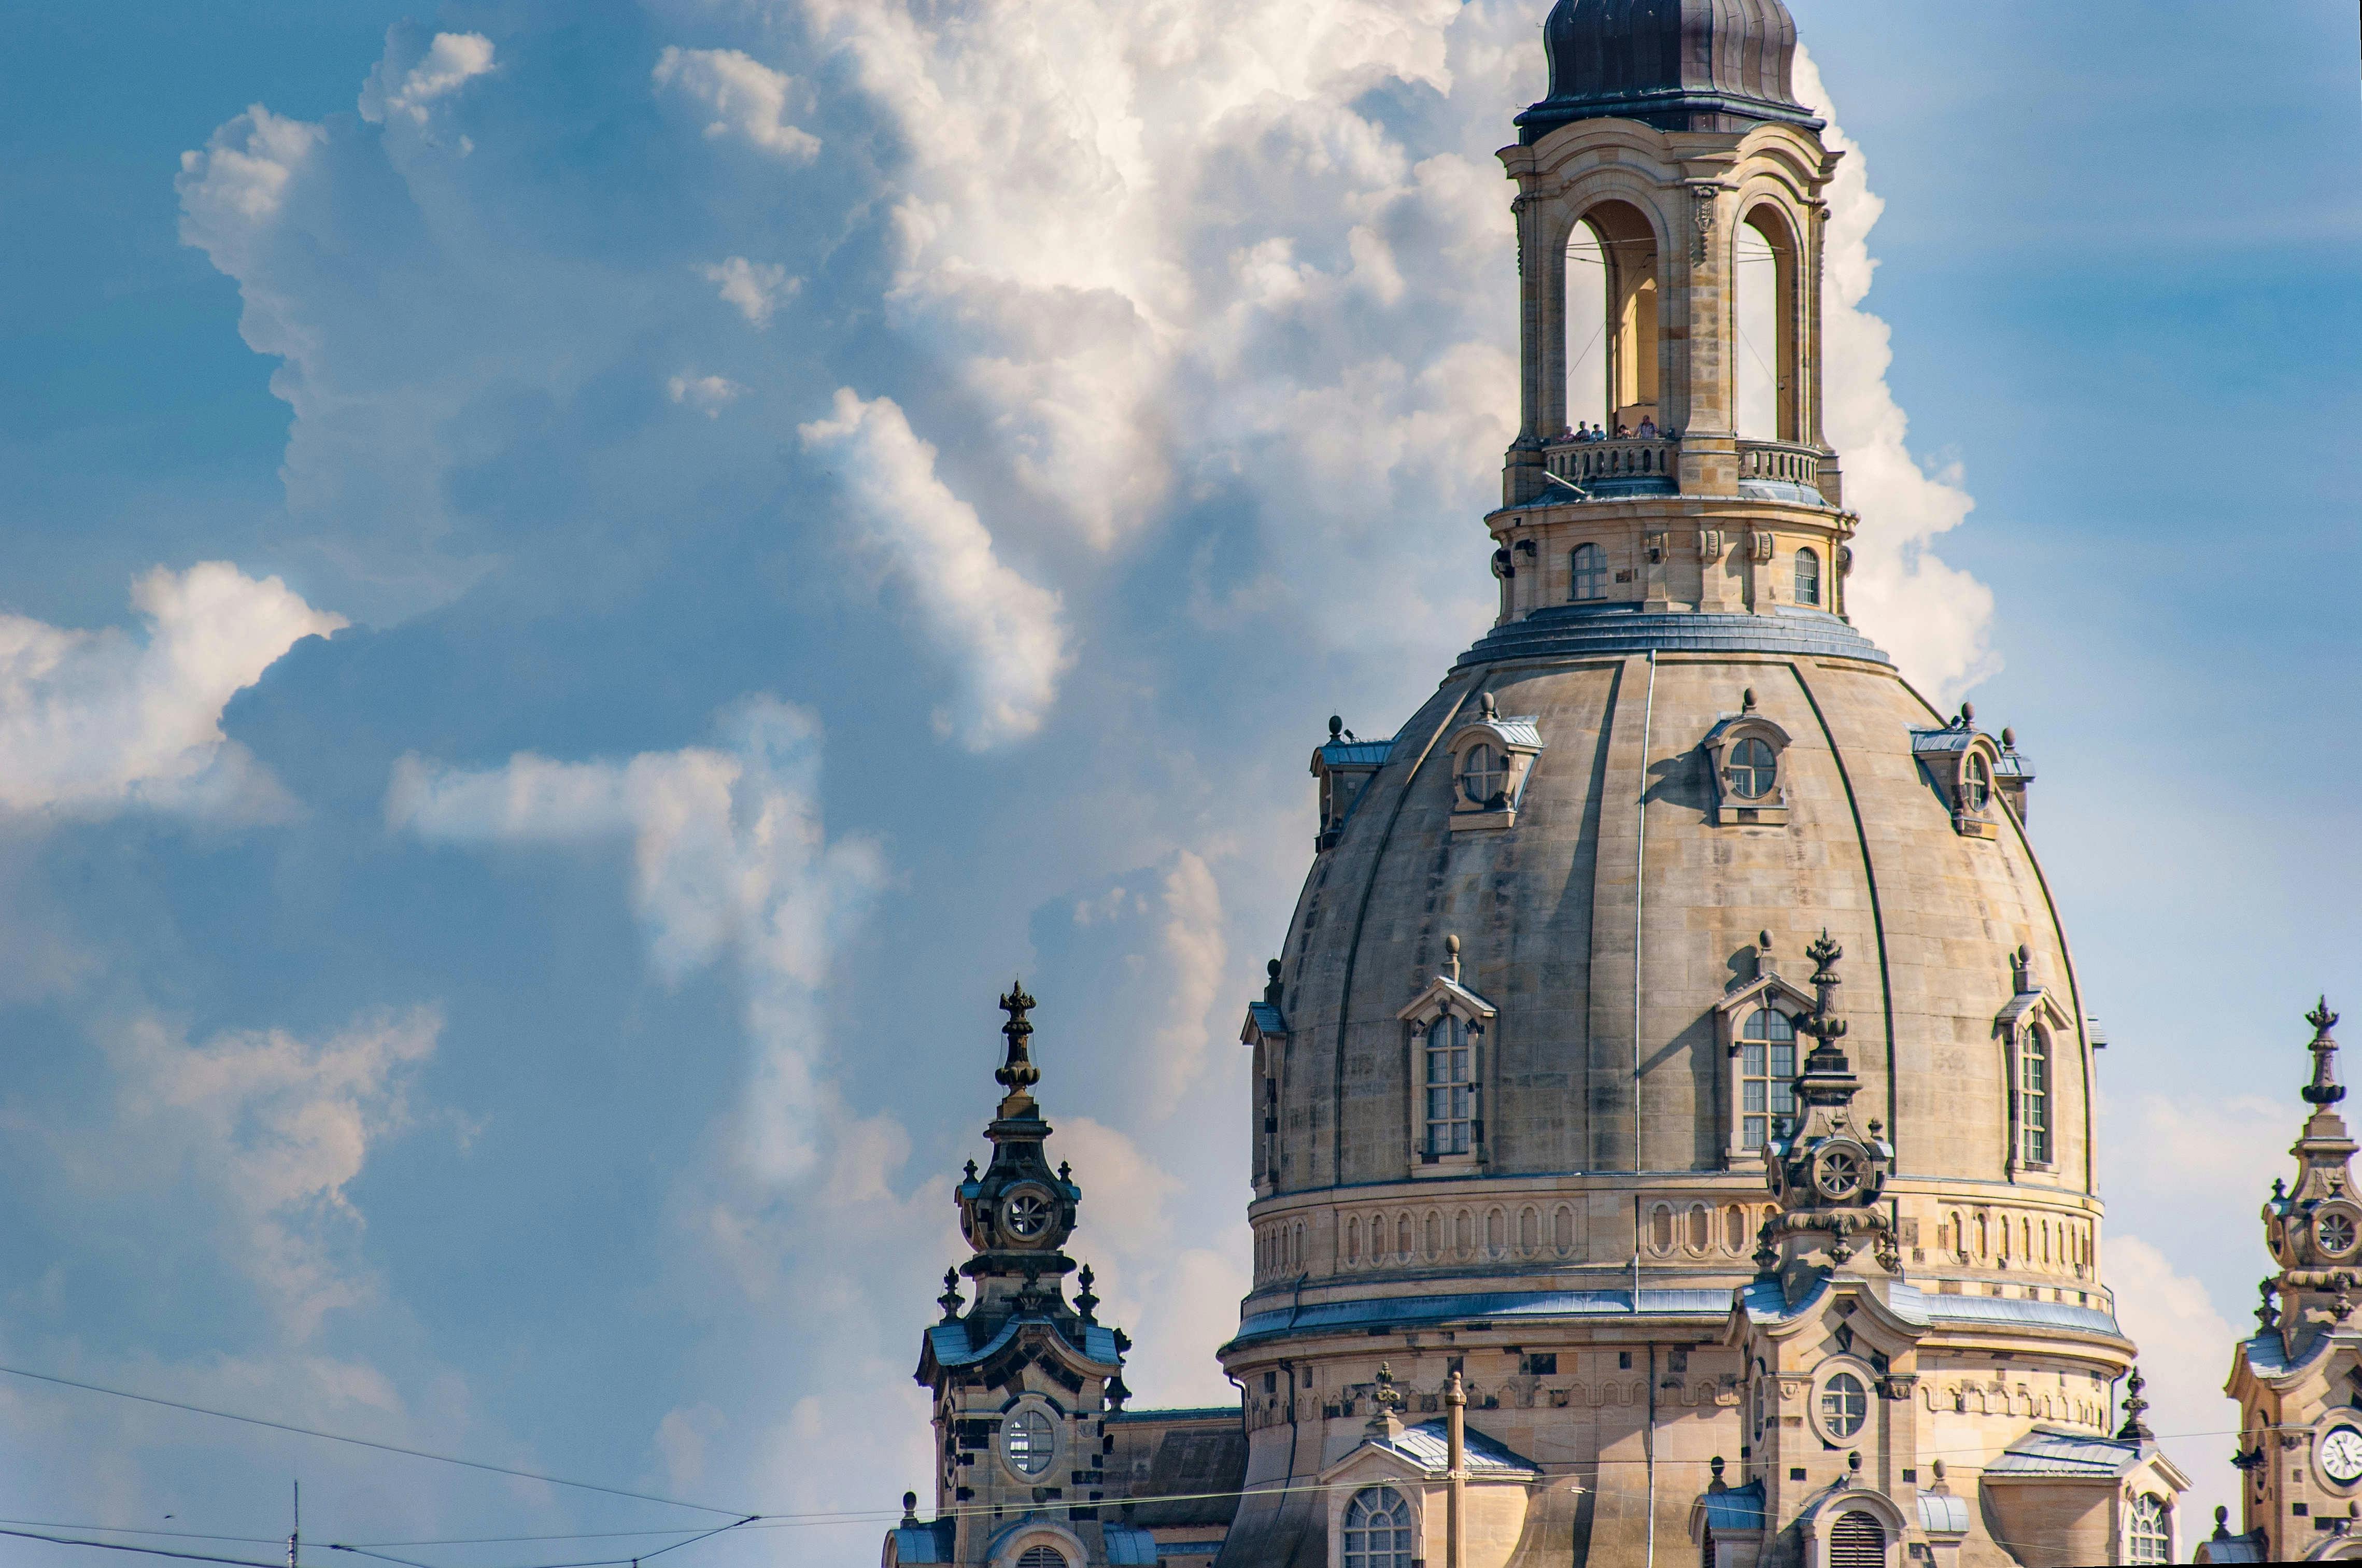 Guided tour of the Frauenkirche and its galleries in Dresden